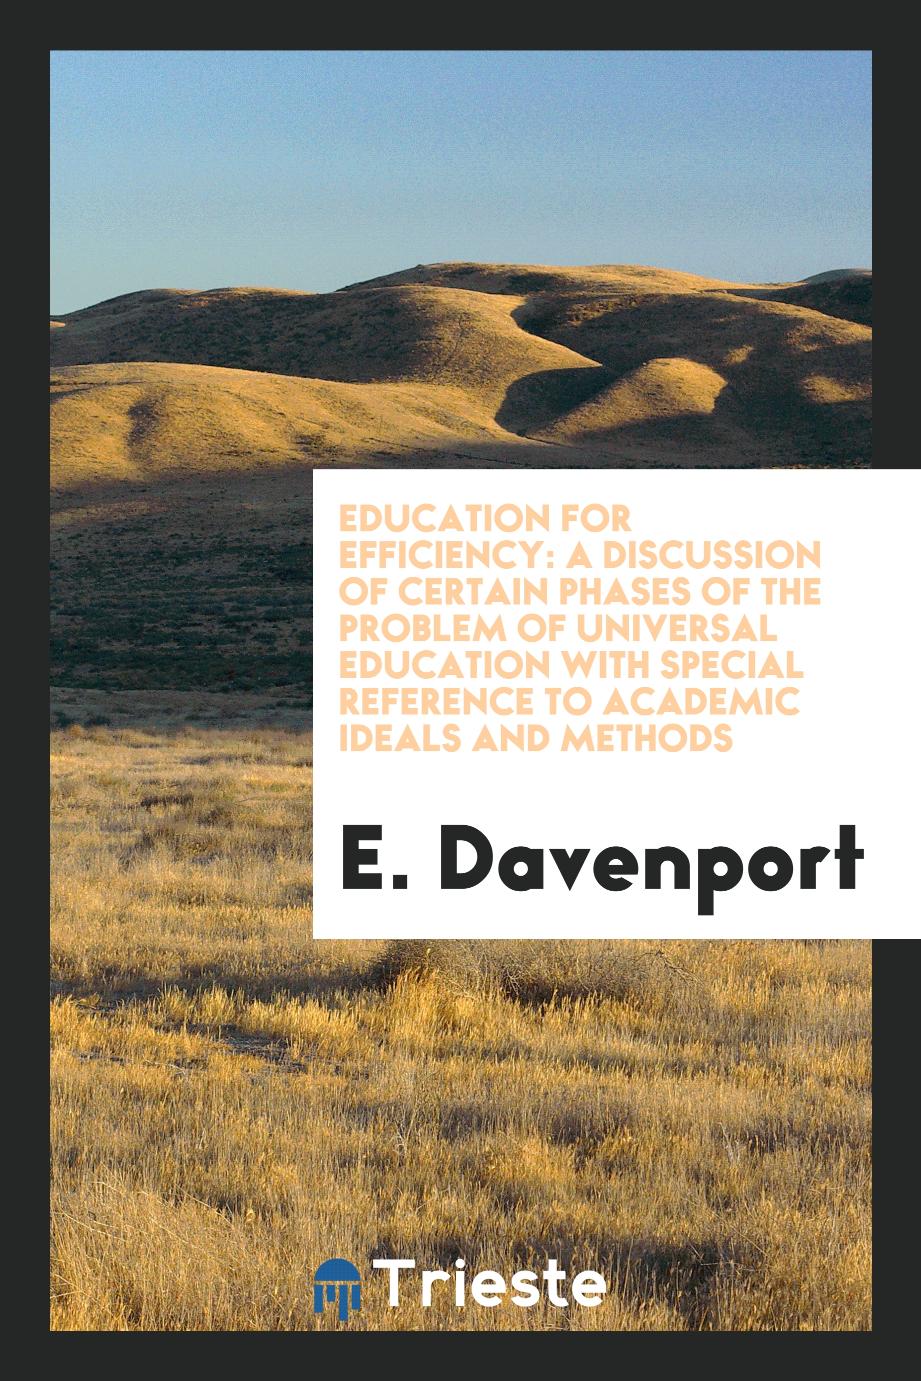 Education for Efficiency: A Discussion of Certain Phases of the Problem of Universal Education with Special Reference to Academic Ideals and Methods